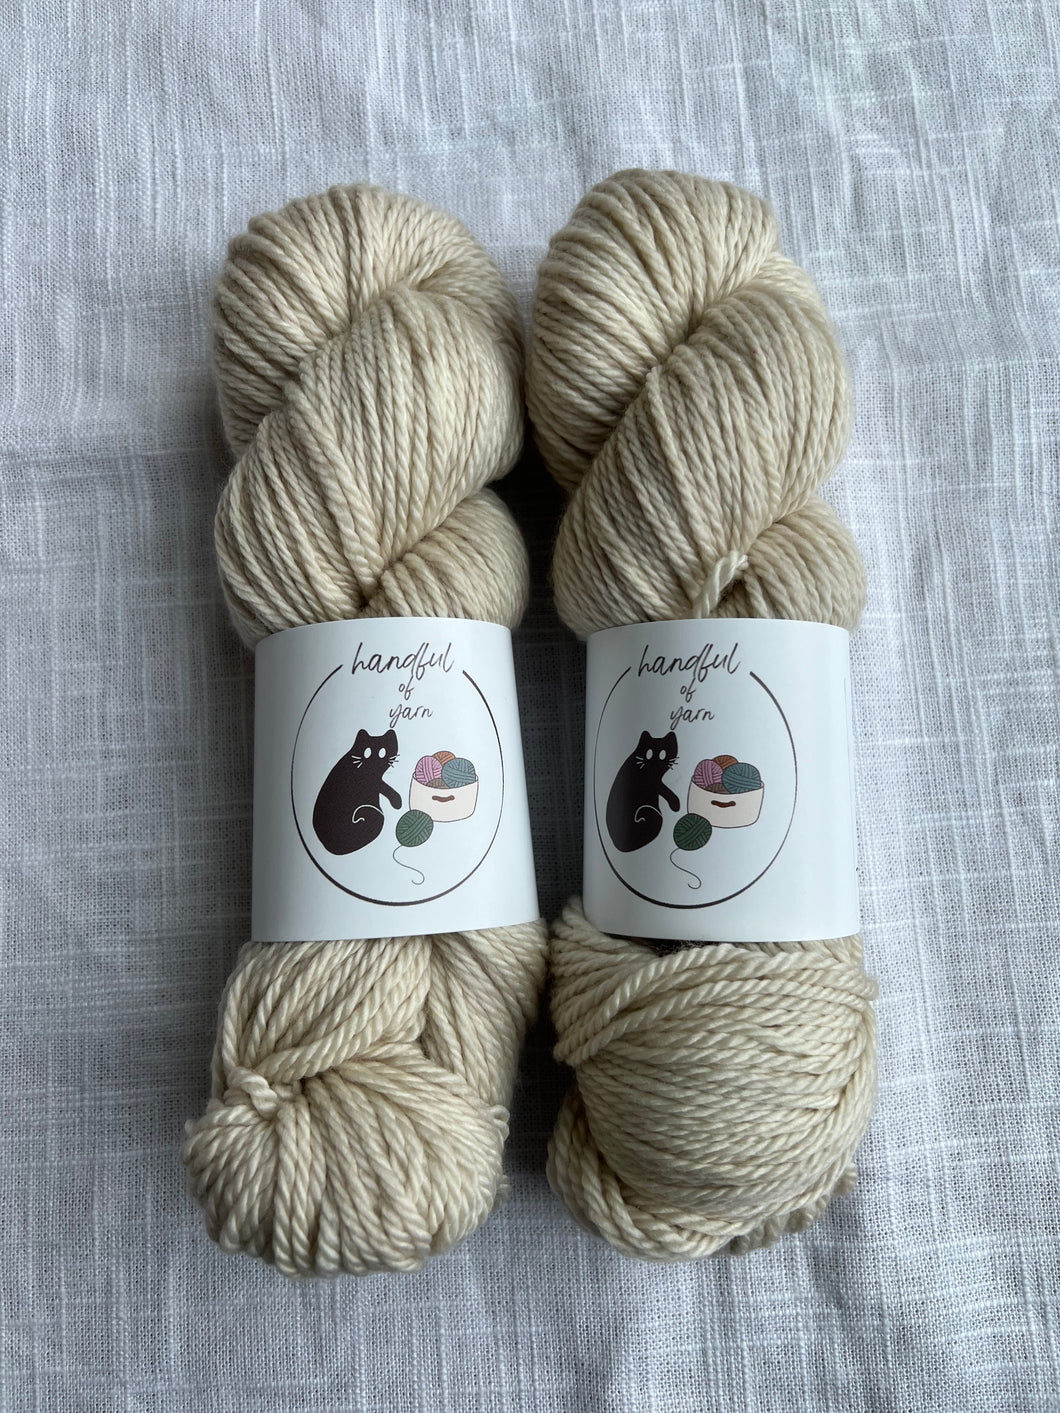 Turnip Head - In Stock (Soft Worsted, dye issue - old base)